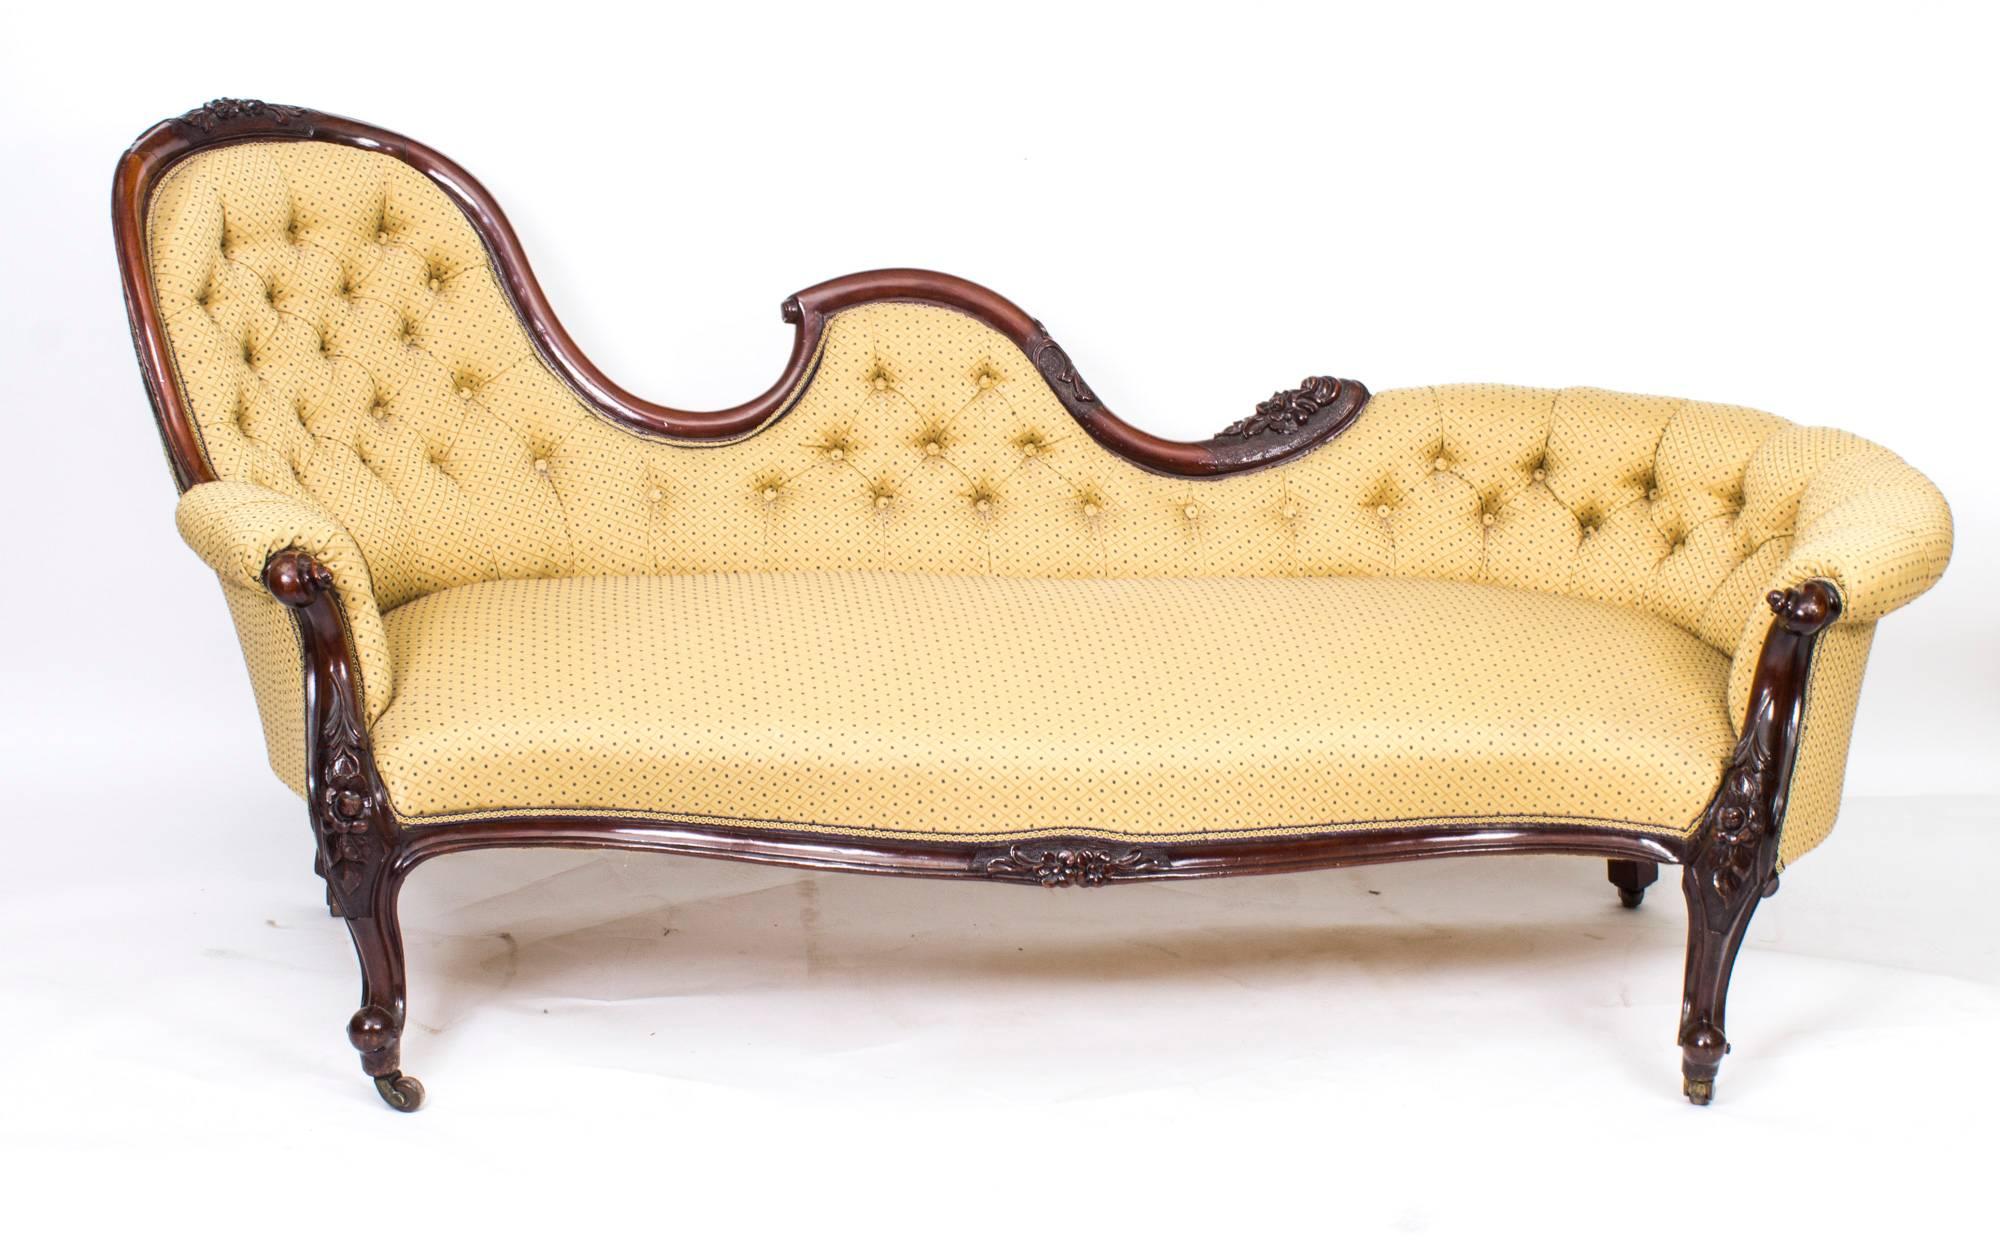 This is a fantastic English antique Victorian chaise longue which dates from circa 1860.

This sofa was made from hand-carved solid walnut and stands on elegant carved cabriole legs which terminate in their original brass and porcelain